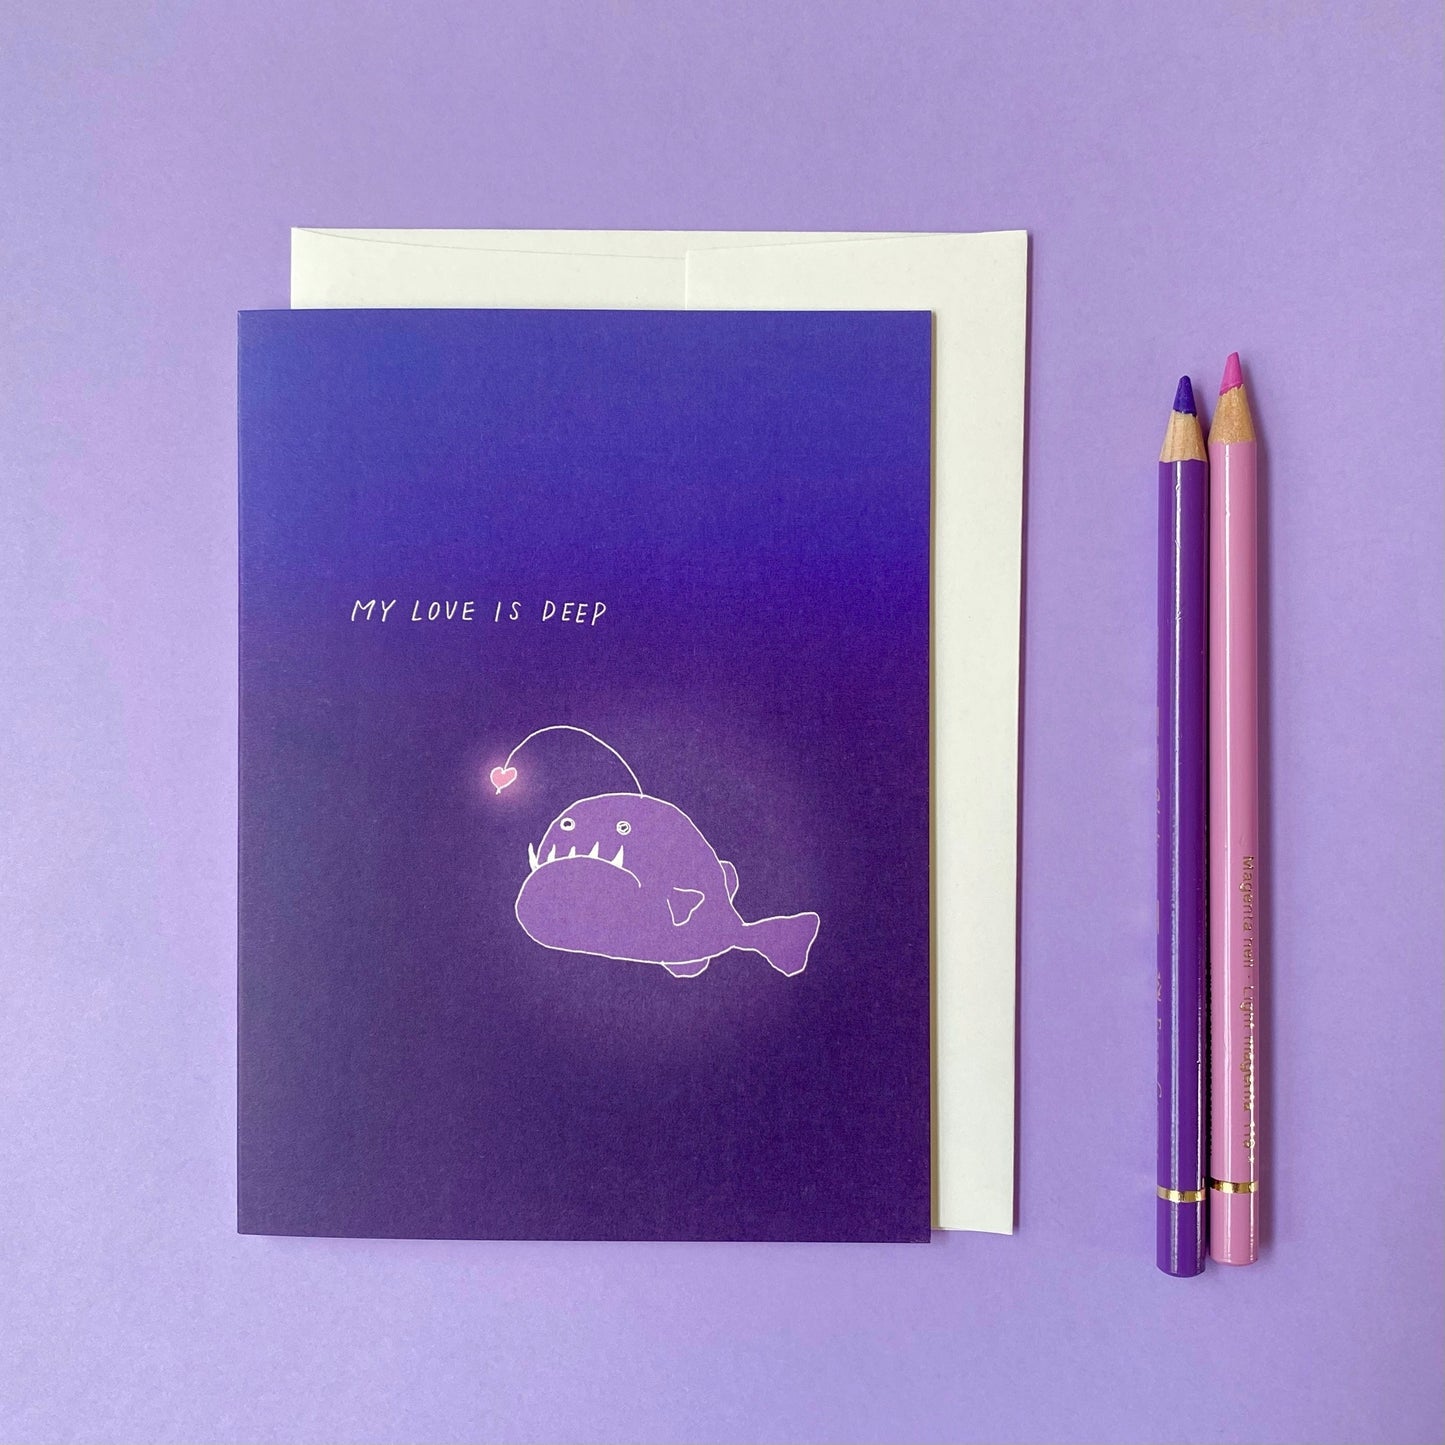 cute just because card that says “My love is deep” with the illustration of anglerfish in the deep sea 